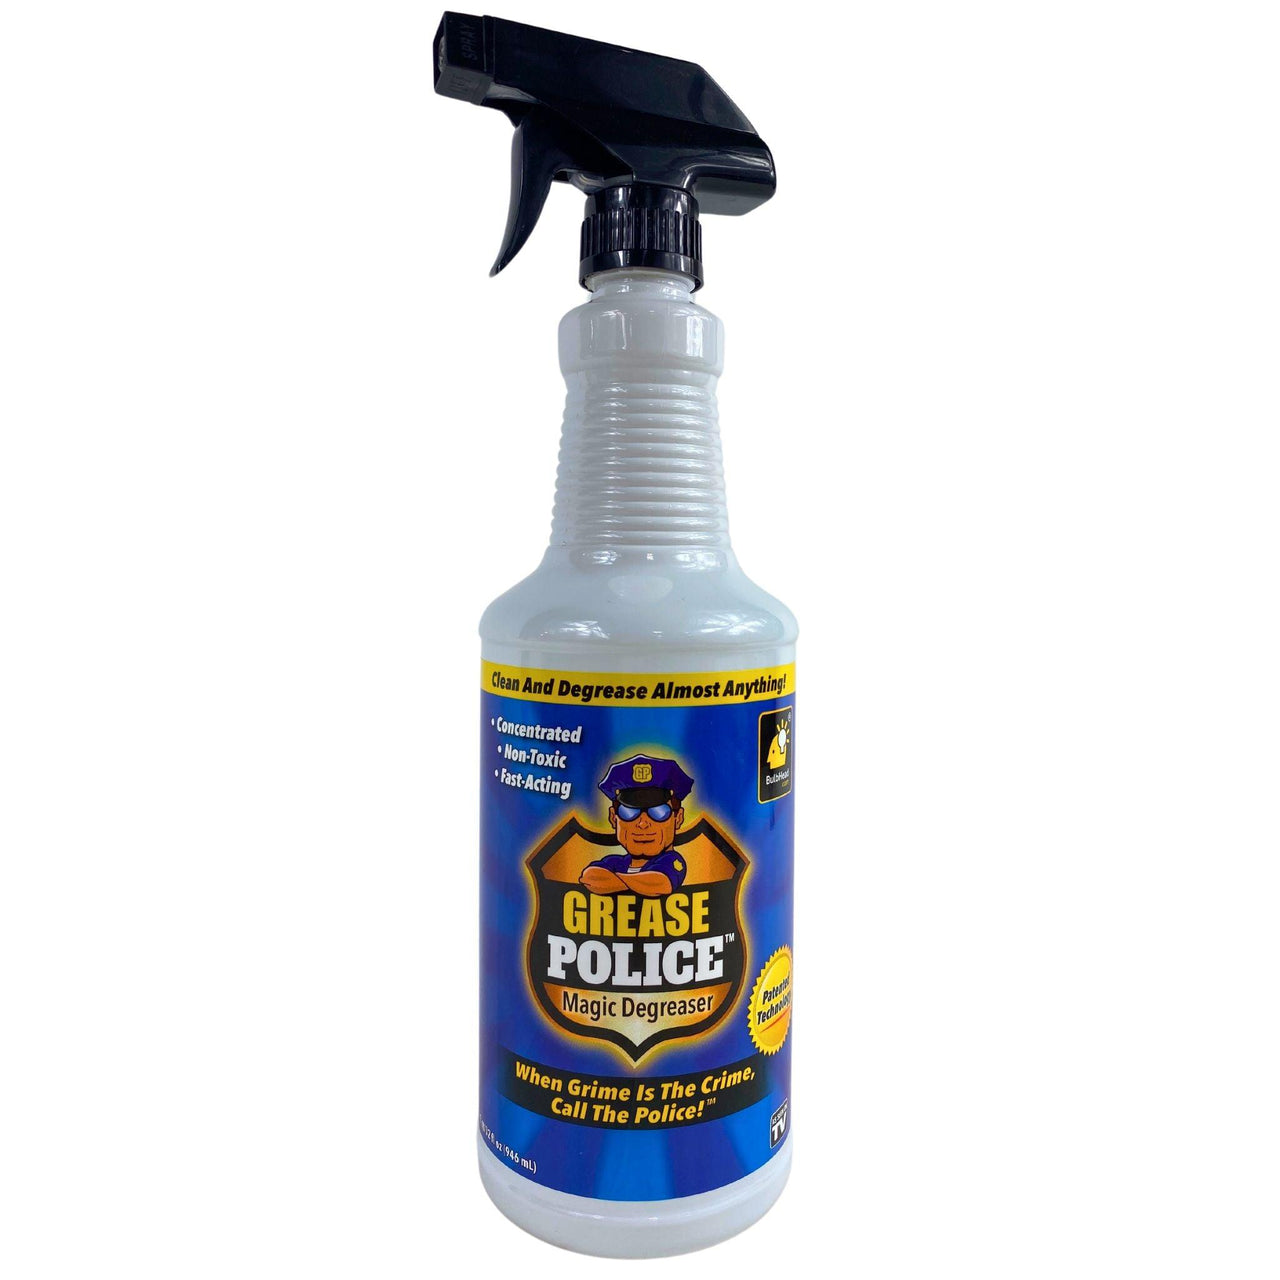 Grease Police Magic Degreaser Cleans & Degreases almost everything 32fl.oz (30 Pcs Lot) - Discount Wholesalers Inc